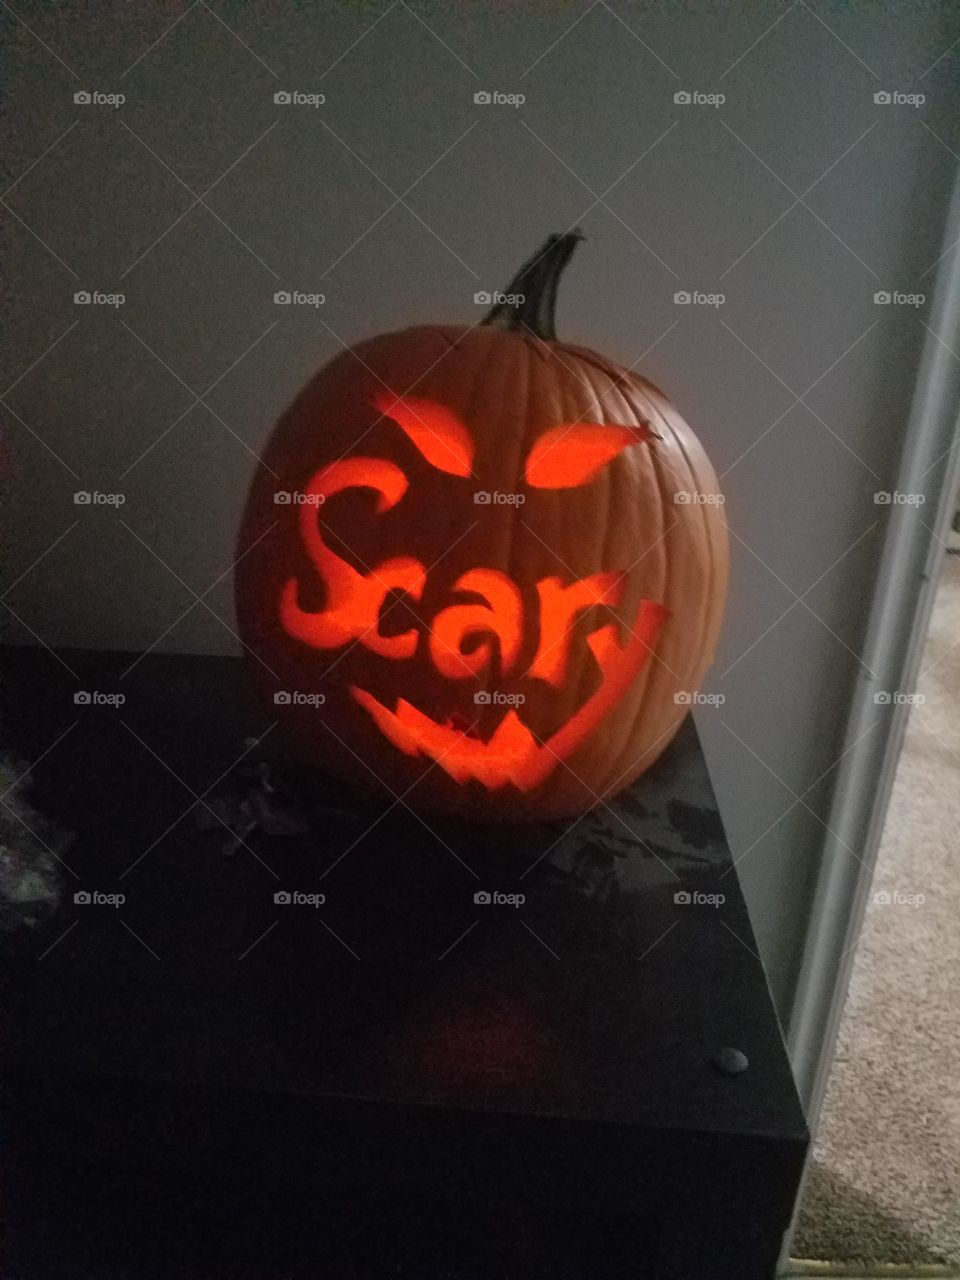 Scary pumpkin carving done for Halloween